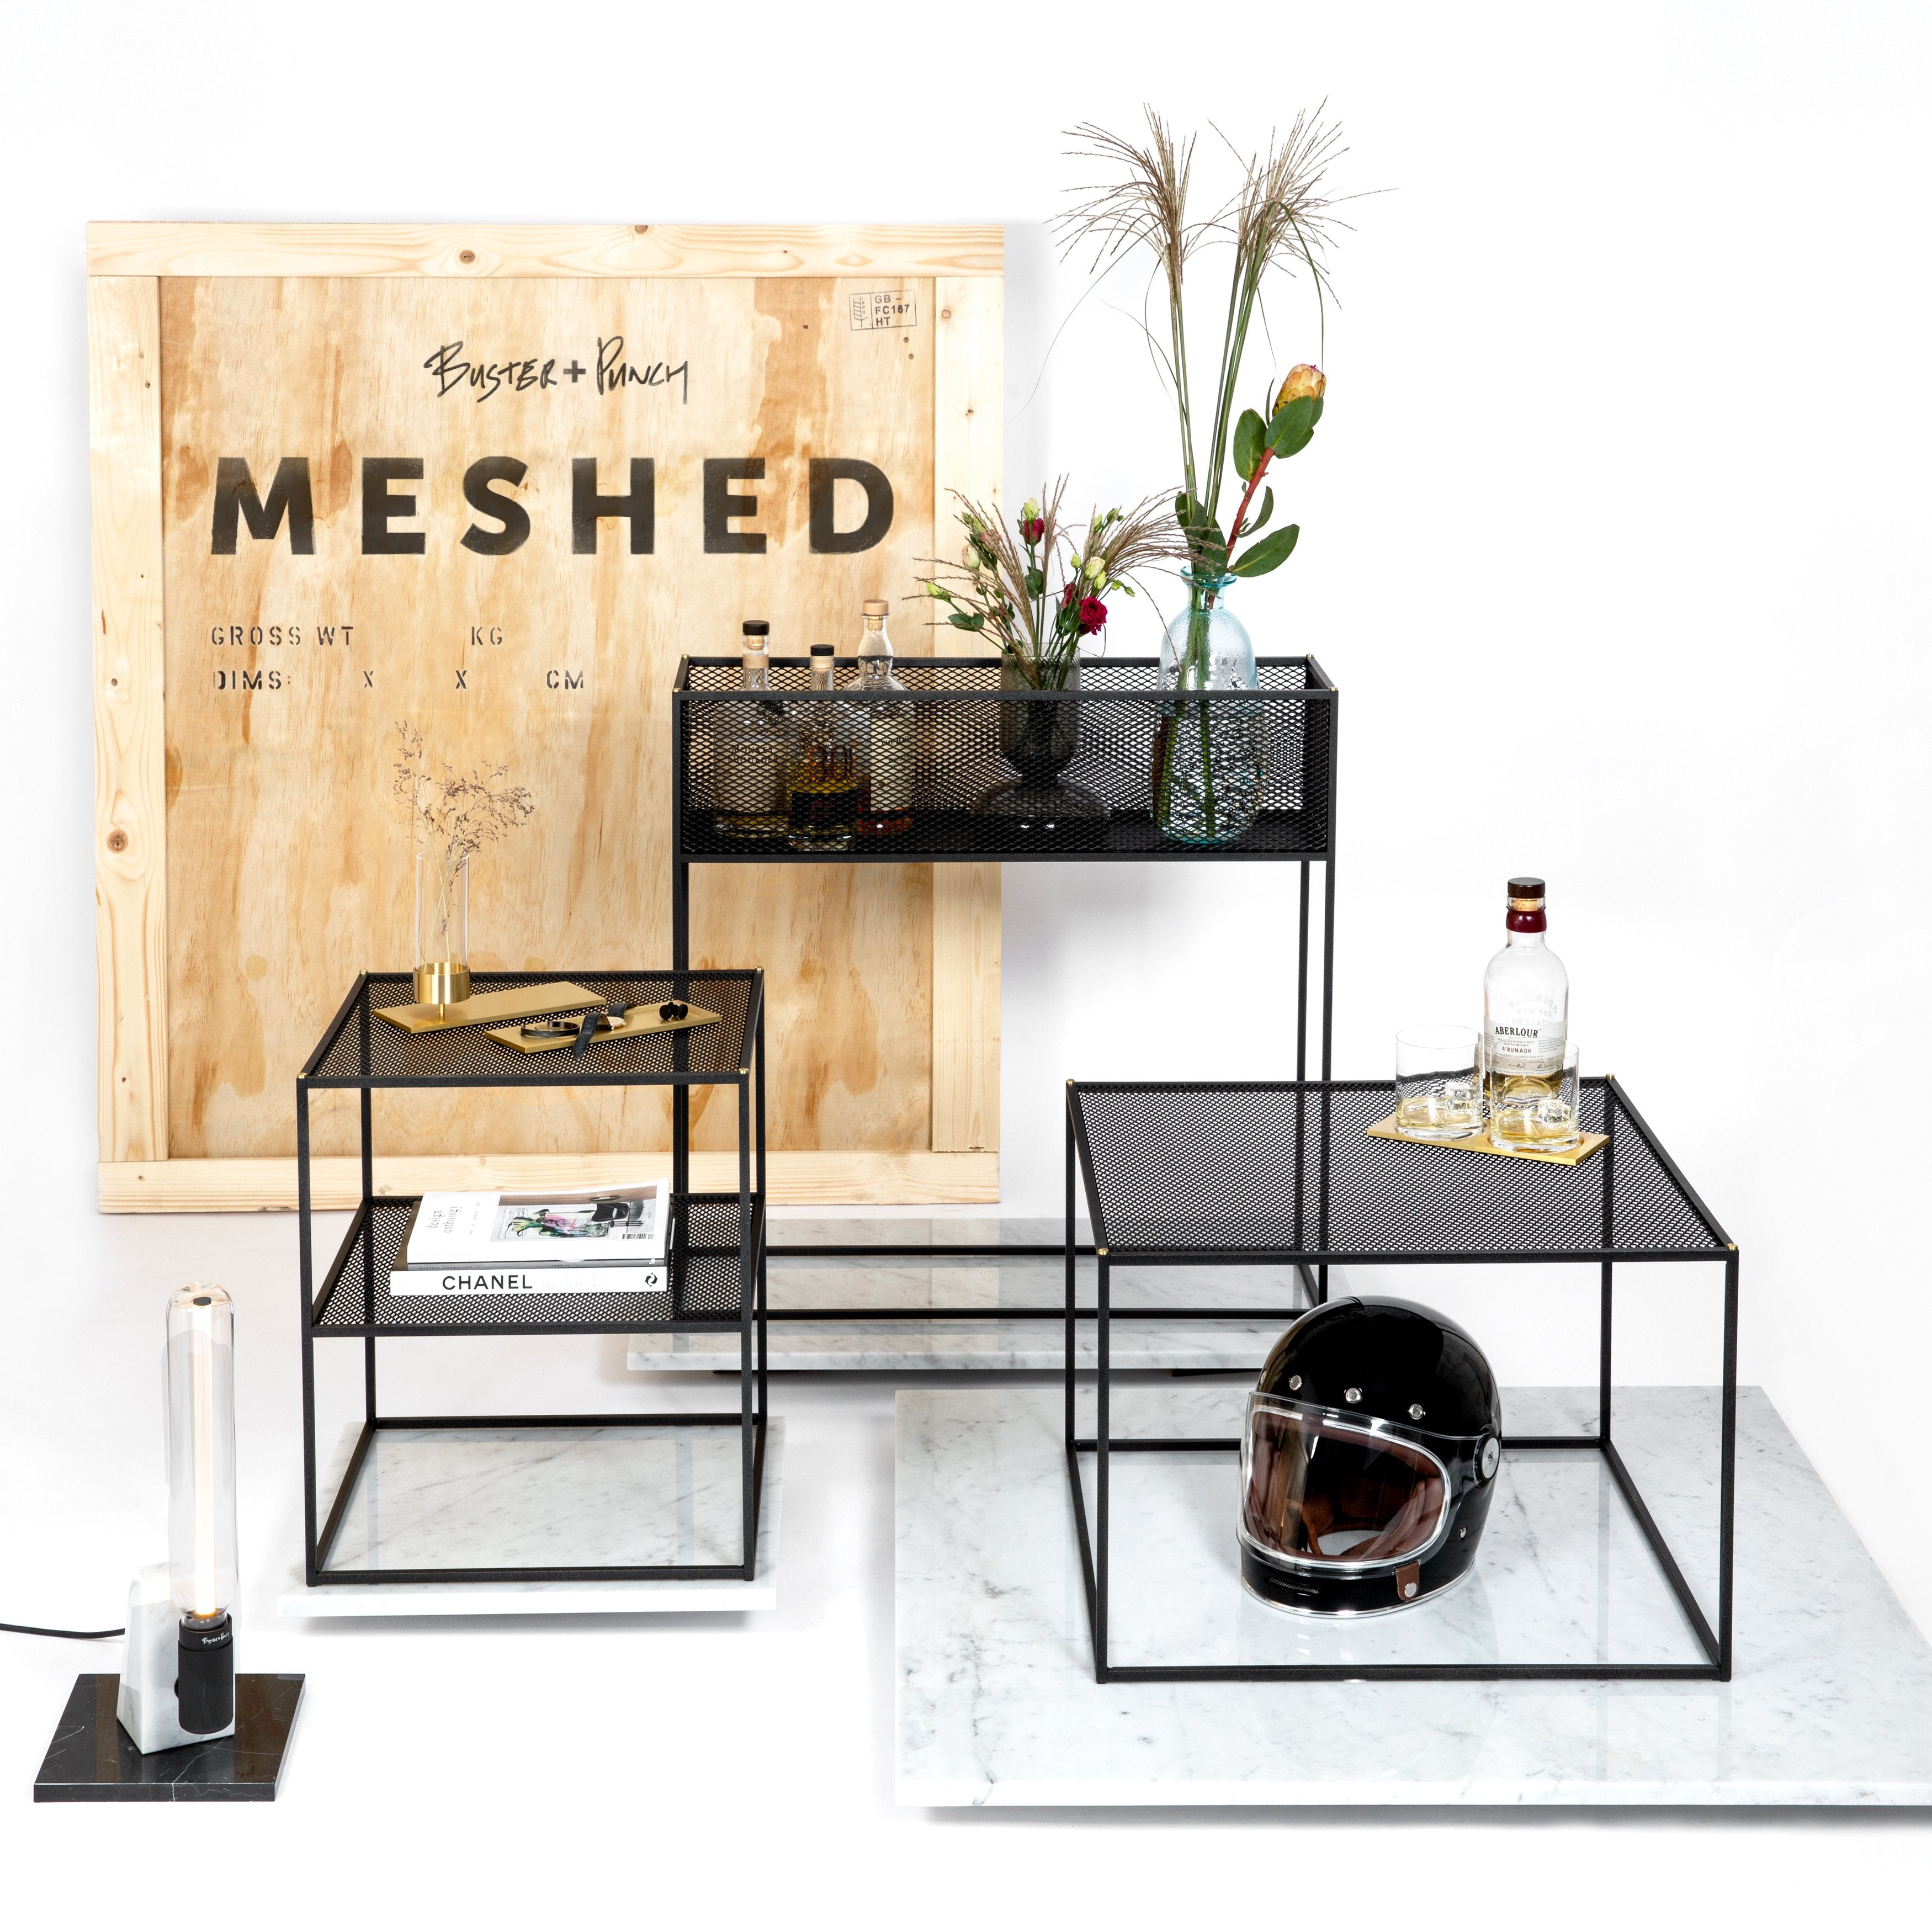 MESHED / PLANTER